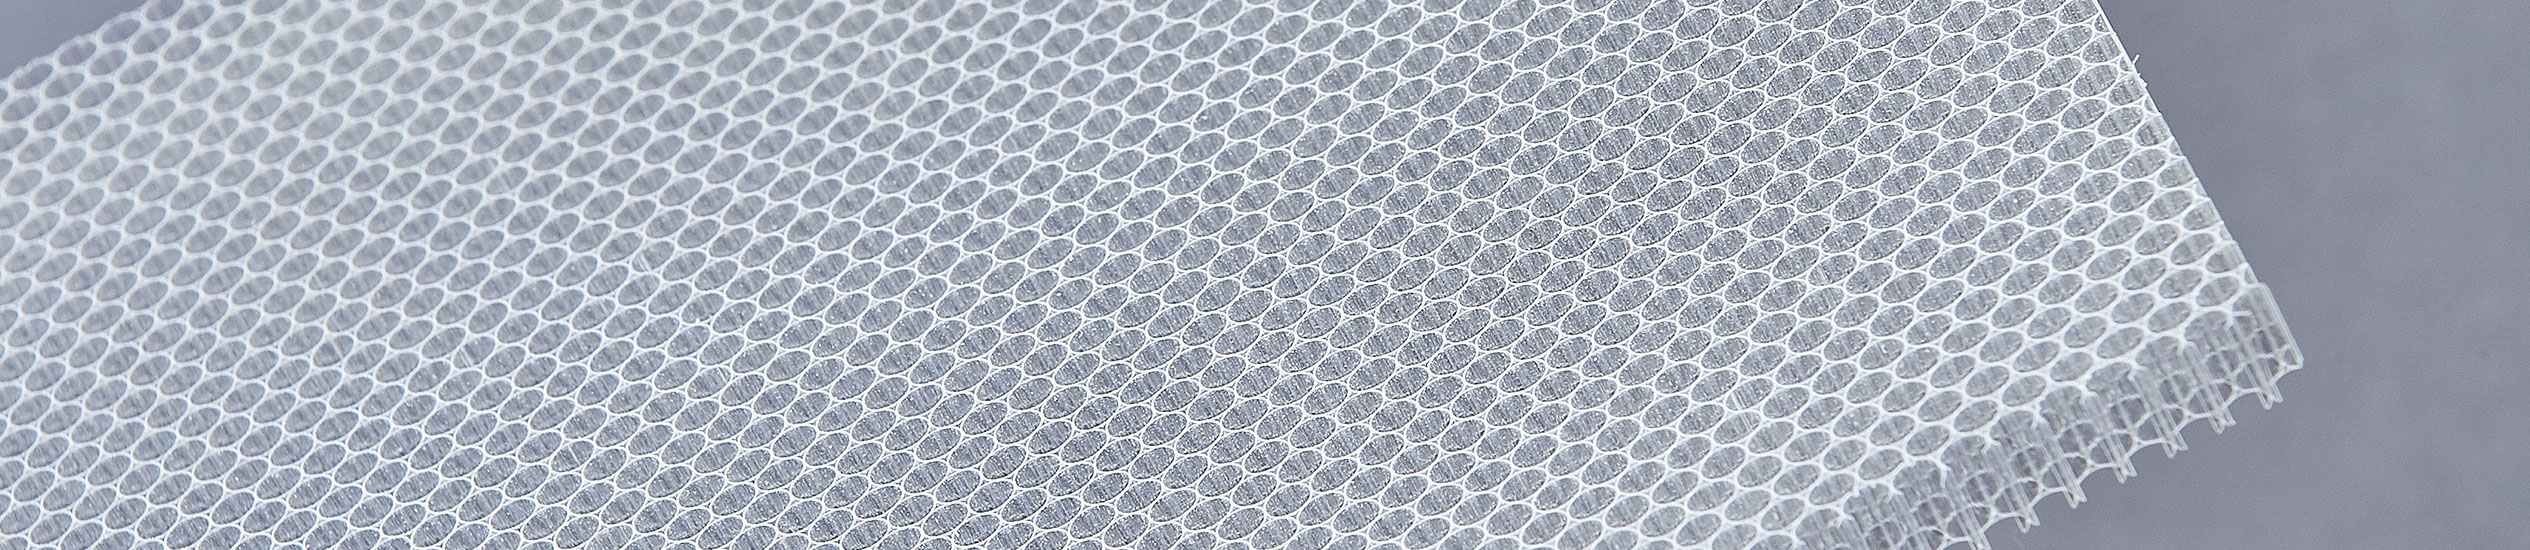 CEL offers a wide range of core materials: aluminium honeycomb, thermoplastics, aramid paper and foams. Their combination offers numerous advantages